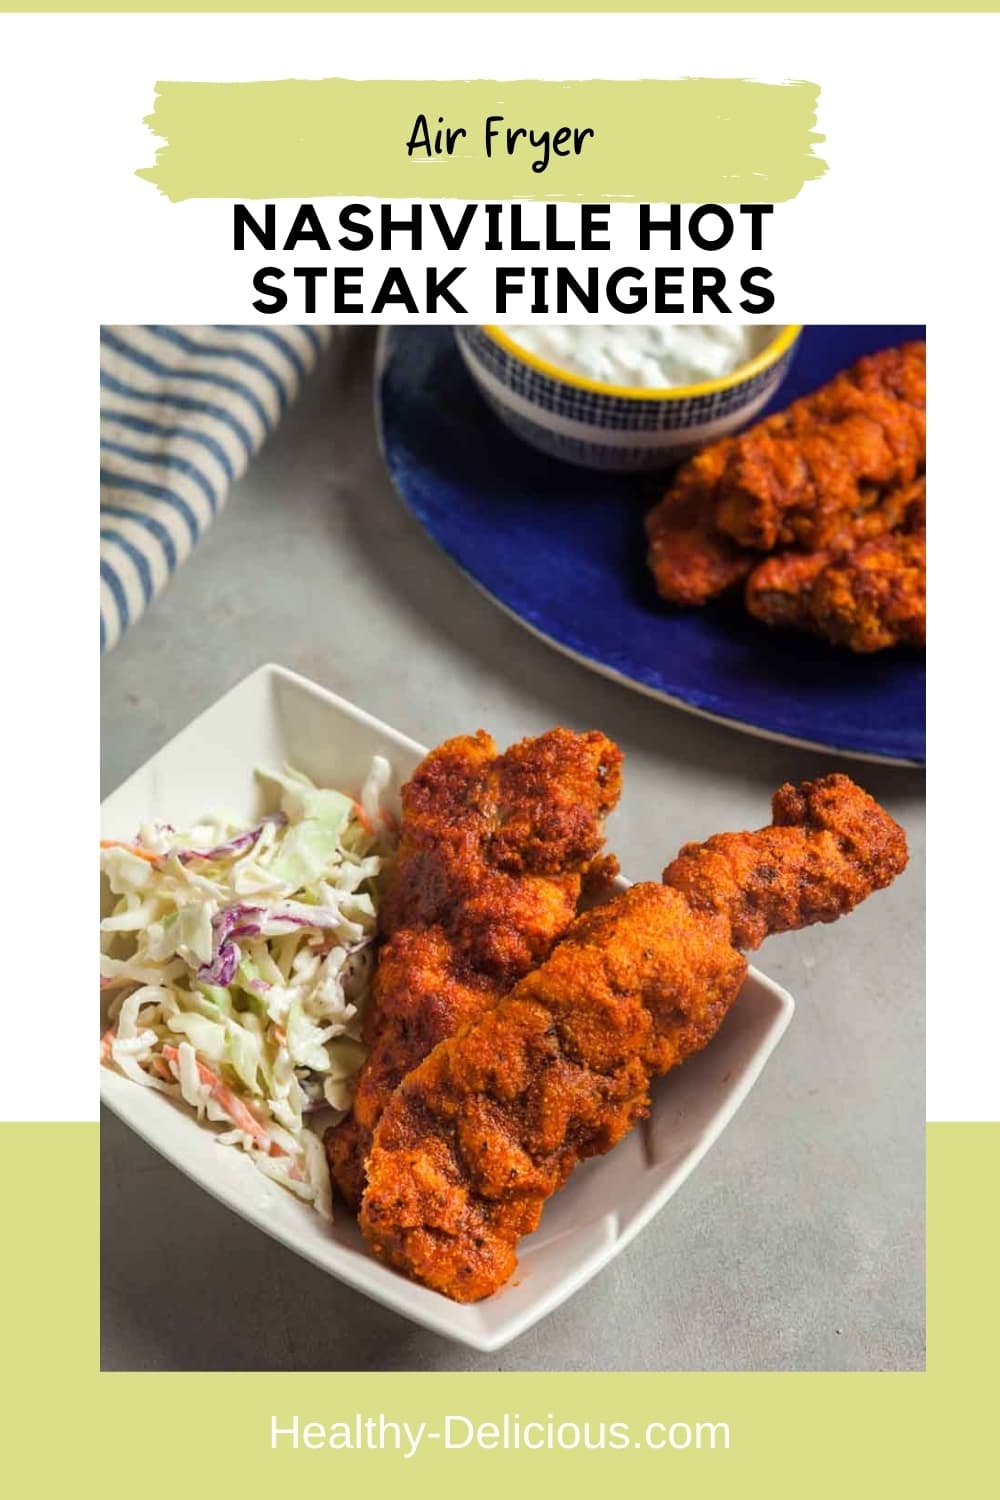 You've probably heard of chicken fingers, but have you ever heard of steak fingers? In my take on this popular Idaho recipe, tender pieces of steak are coated in spicy gluten-free breading and fried until they're perfectly crisp. Brush on some more Nashville hot sauce, then dip them in creamy dill pickle dip to tone down the heat. Low carb and gluten-free! via @HealthyDelish